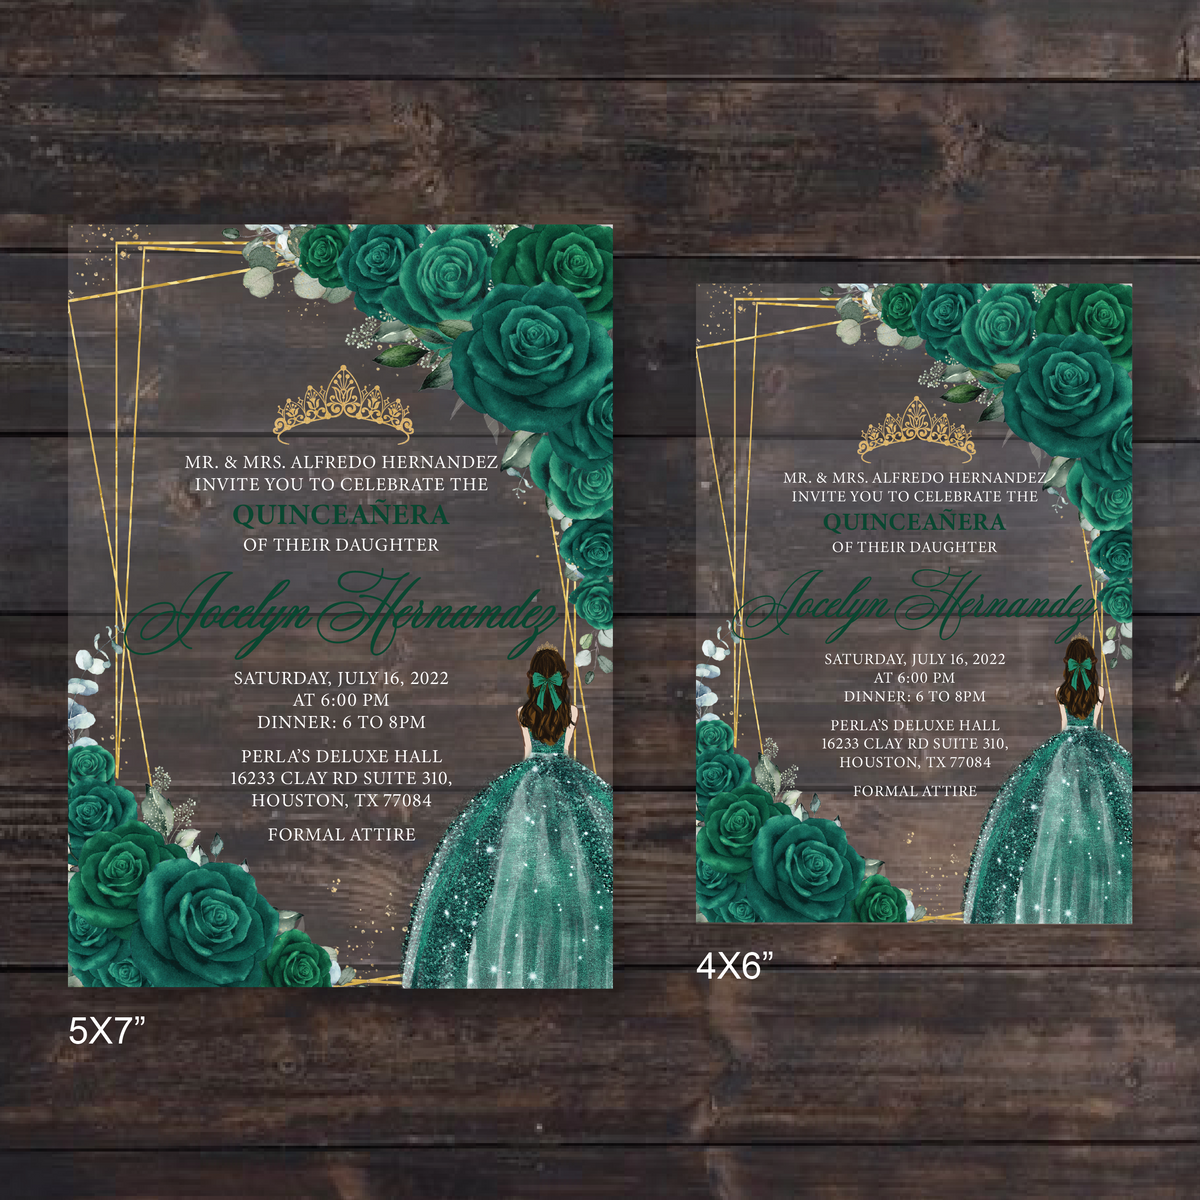 Emerald Green and Gold Frame with Butterflies Acrylic Invitations –  Invitations by Luis Sanchez